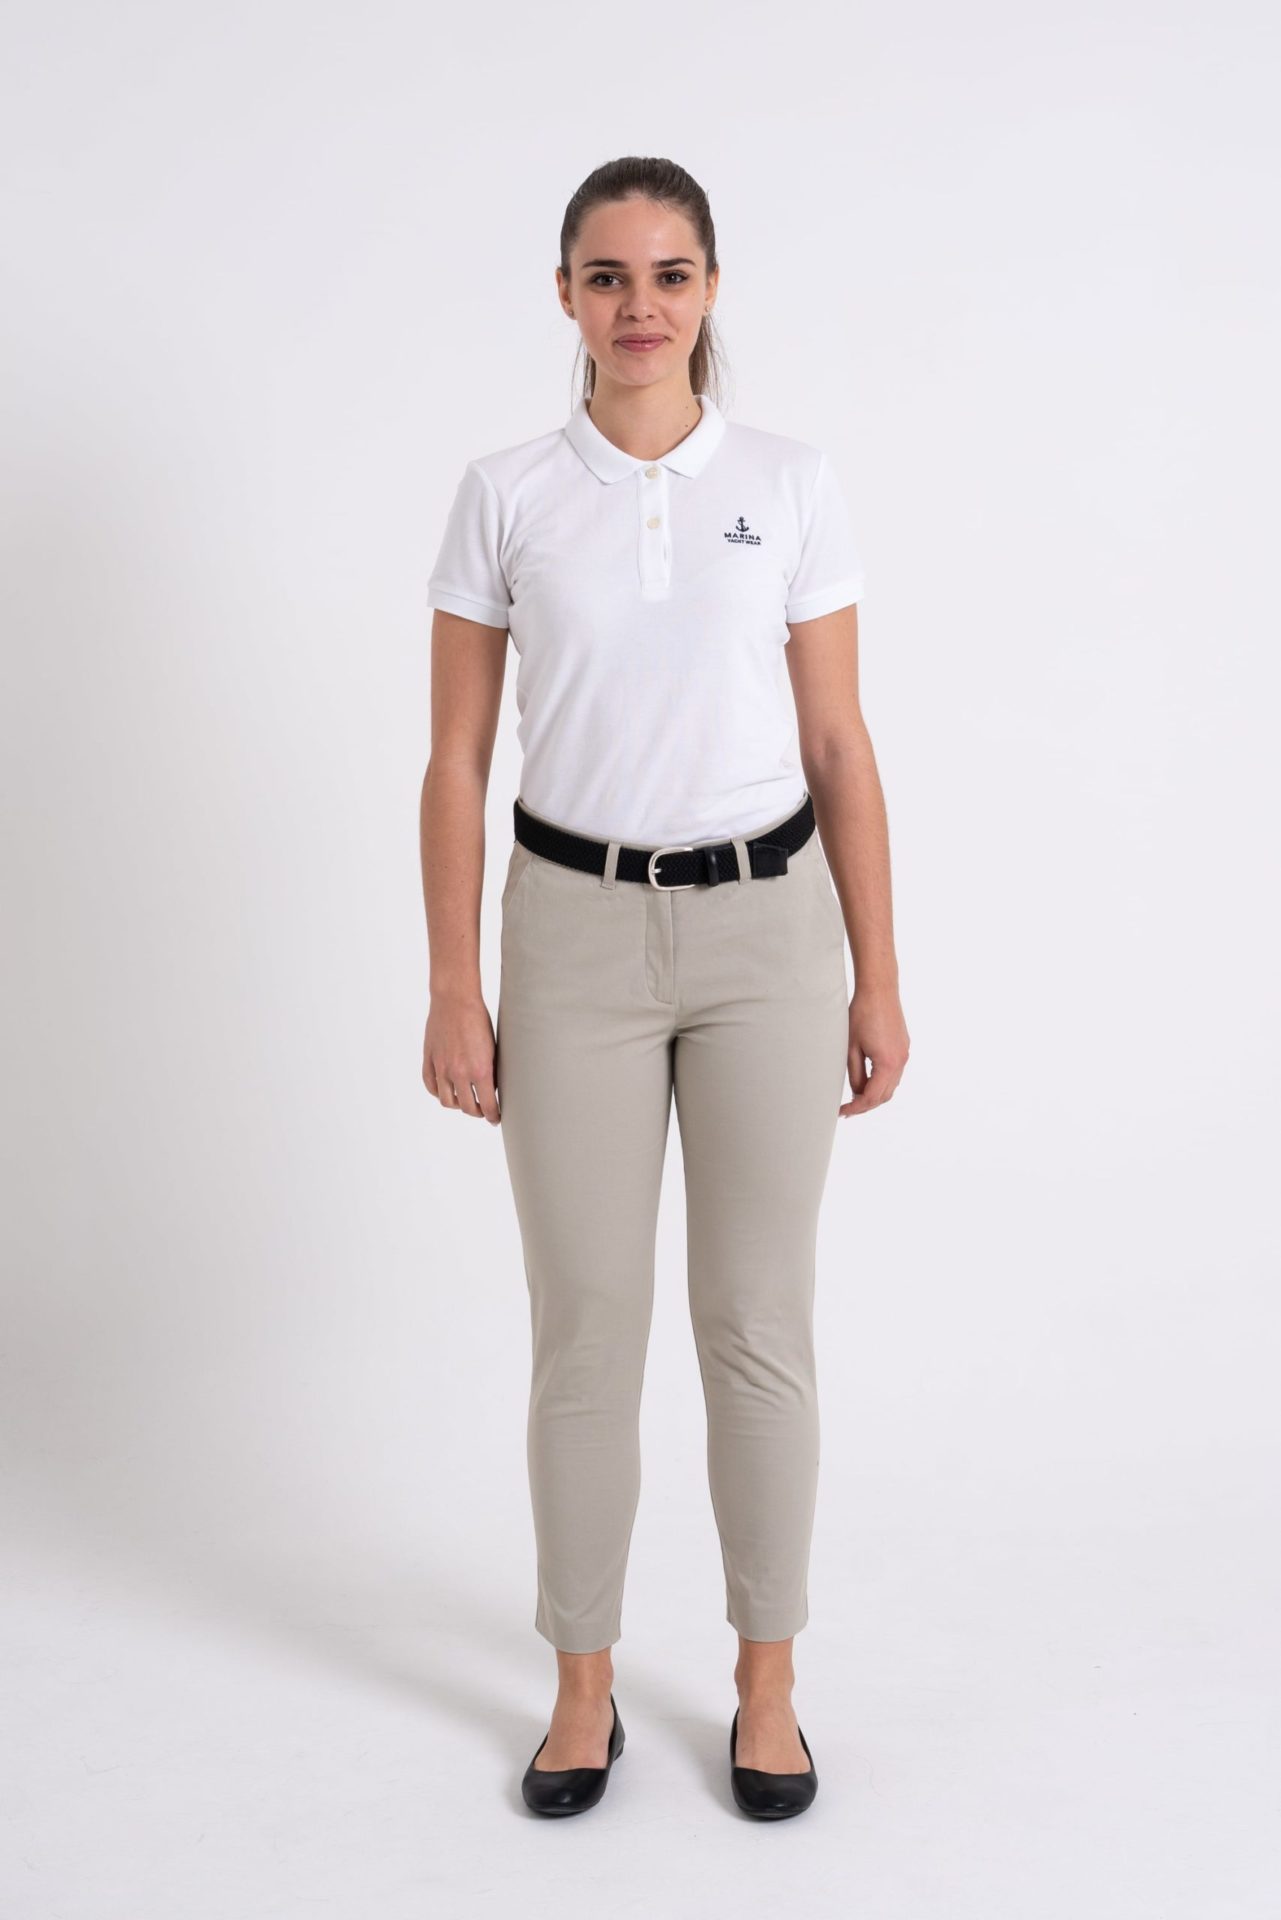 Ladies Long Pants for yacht crew